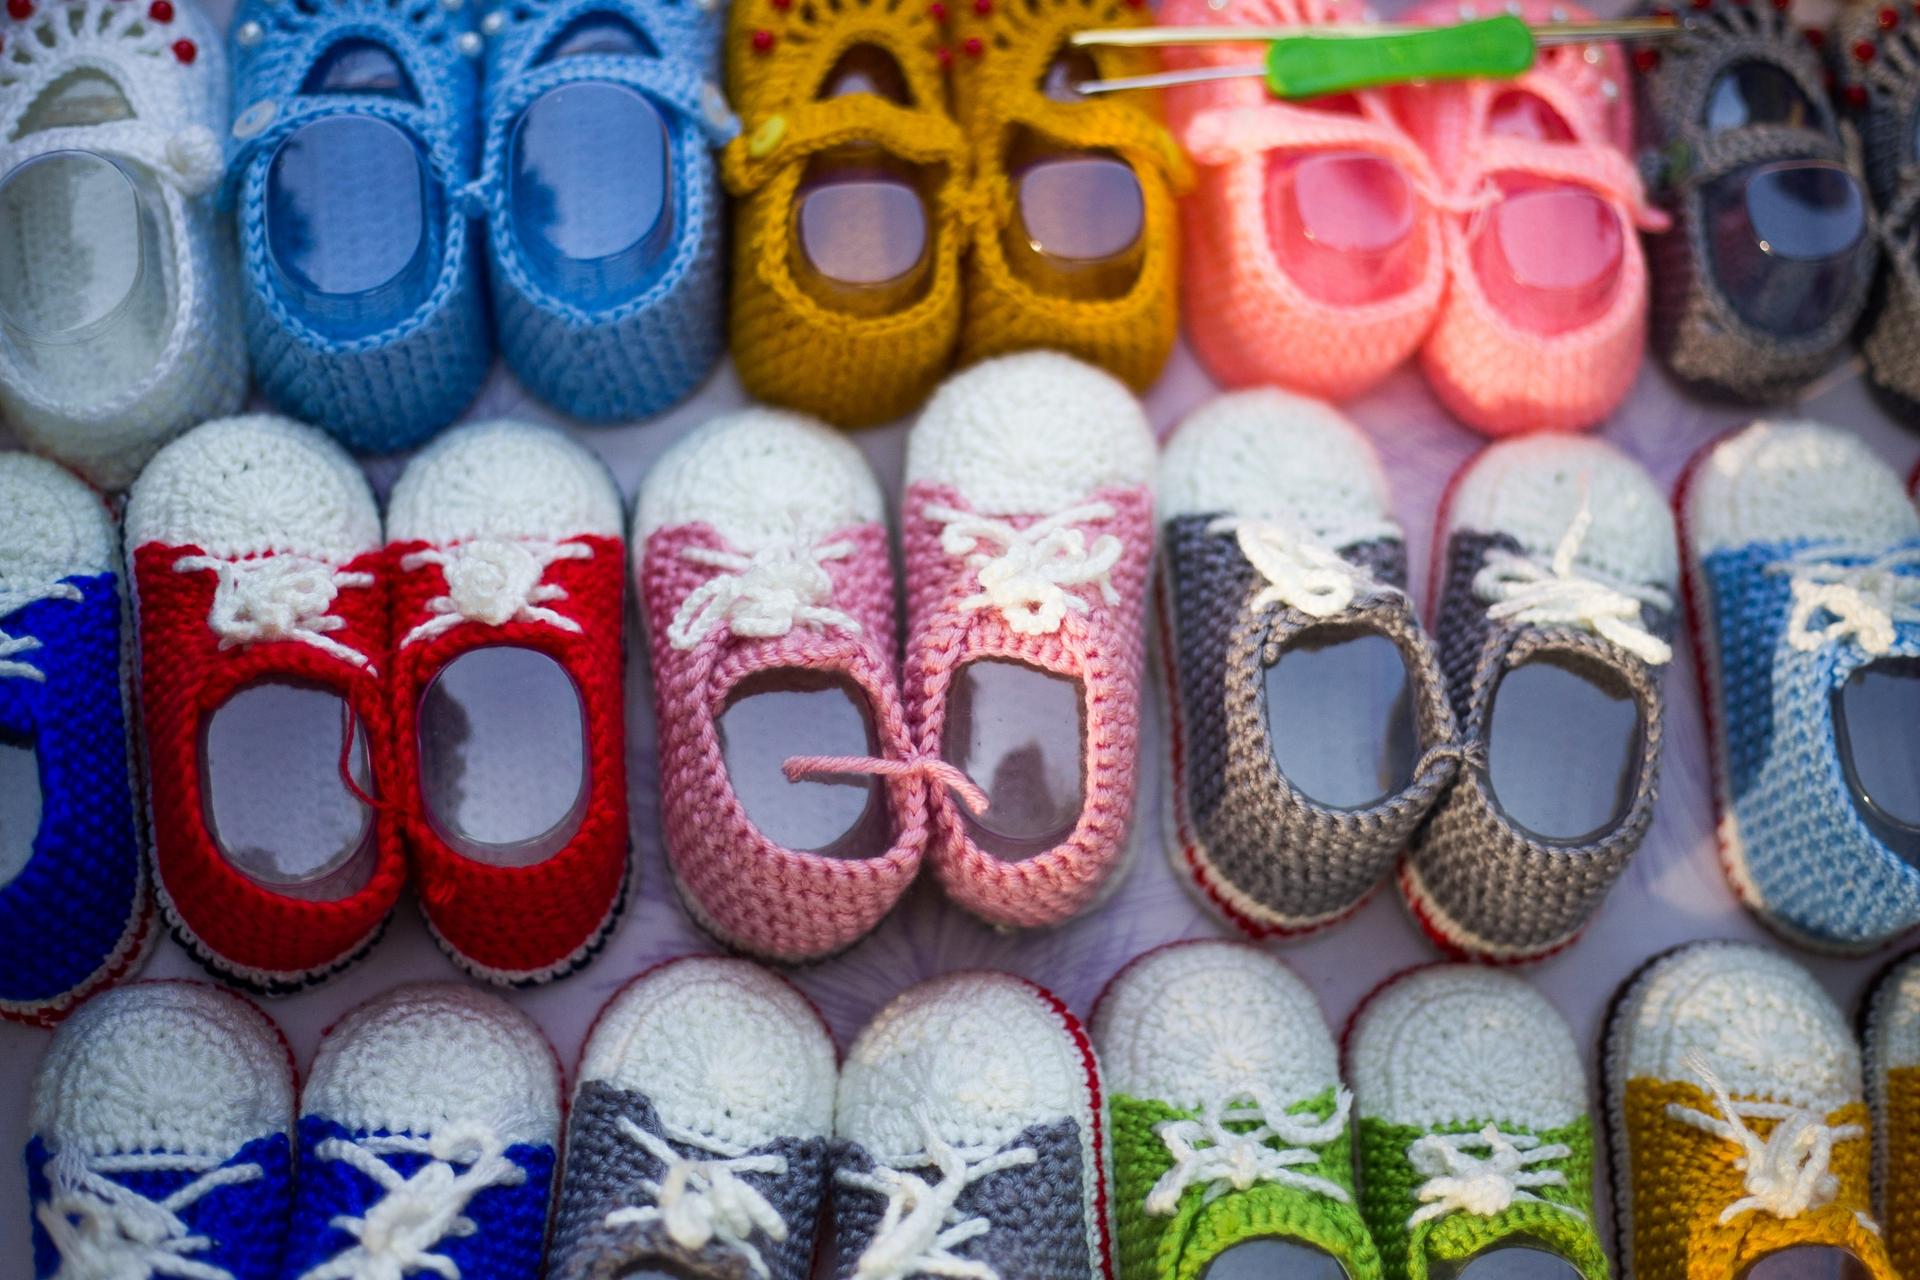 Colorful, knitted baby shoes